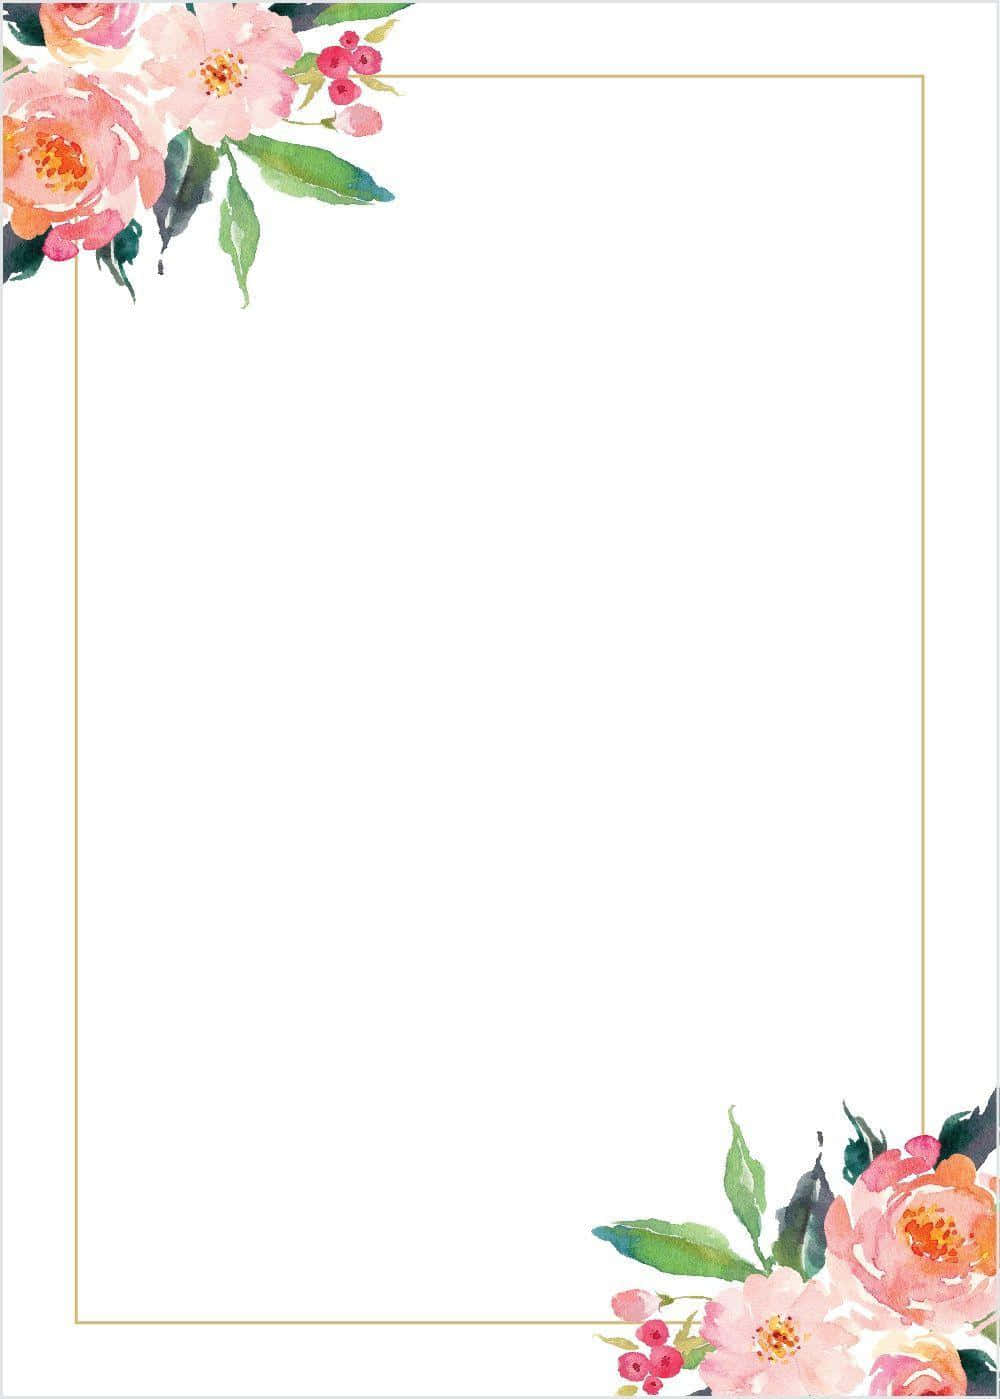 Unique, classic and inspiring wedding card background